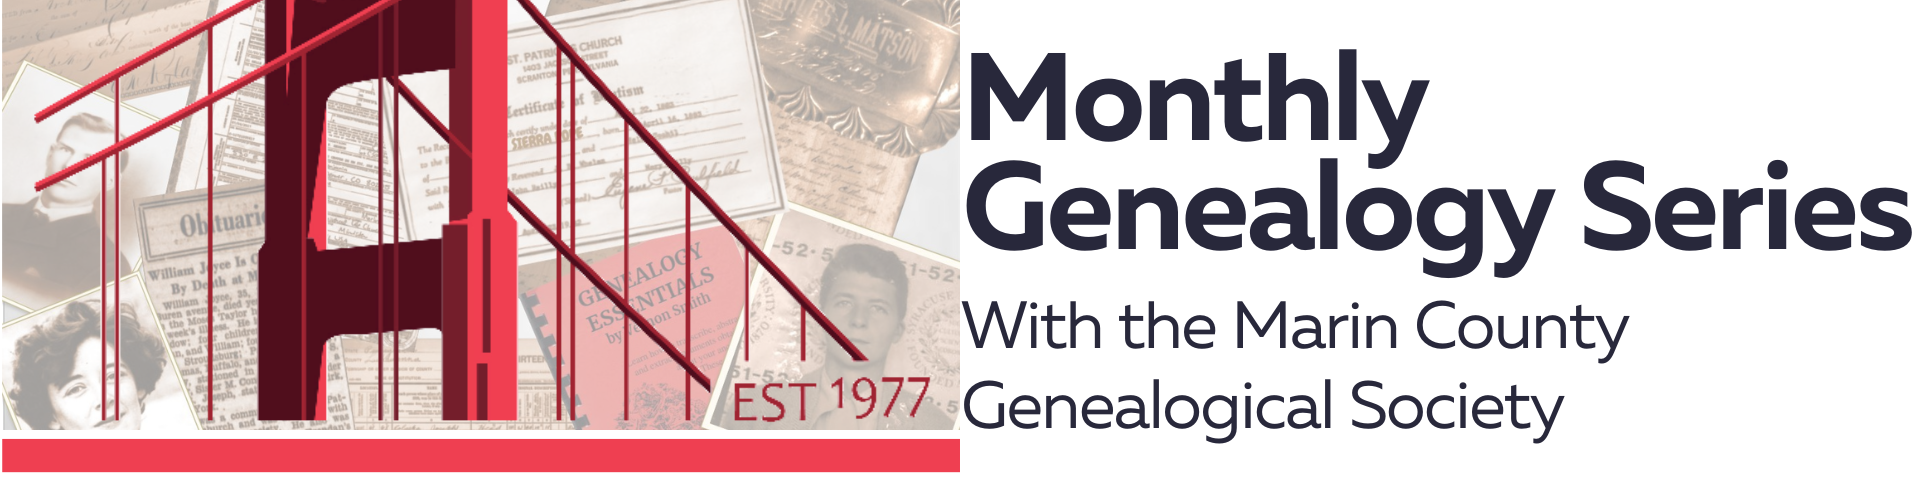 Monthly Genealogy Series @ Downtown Library